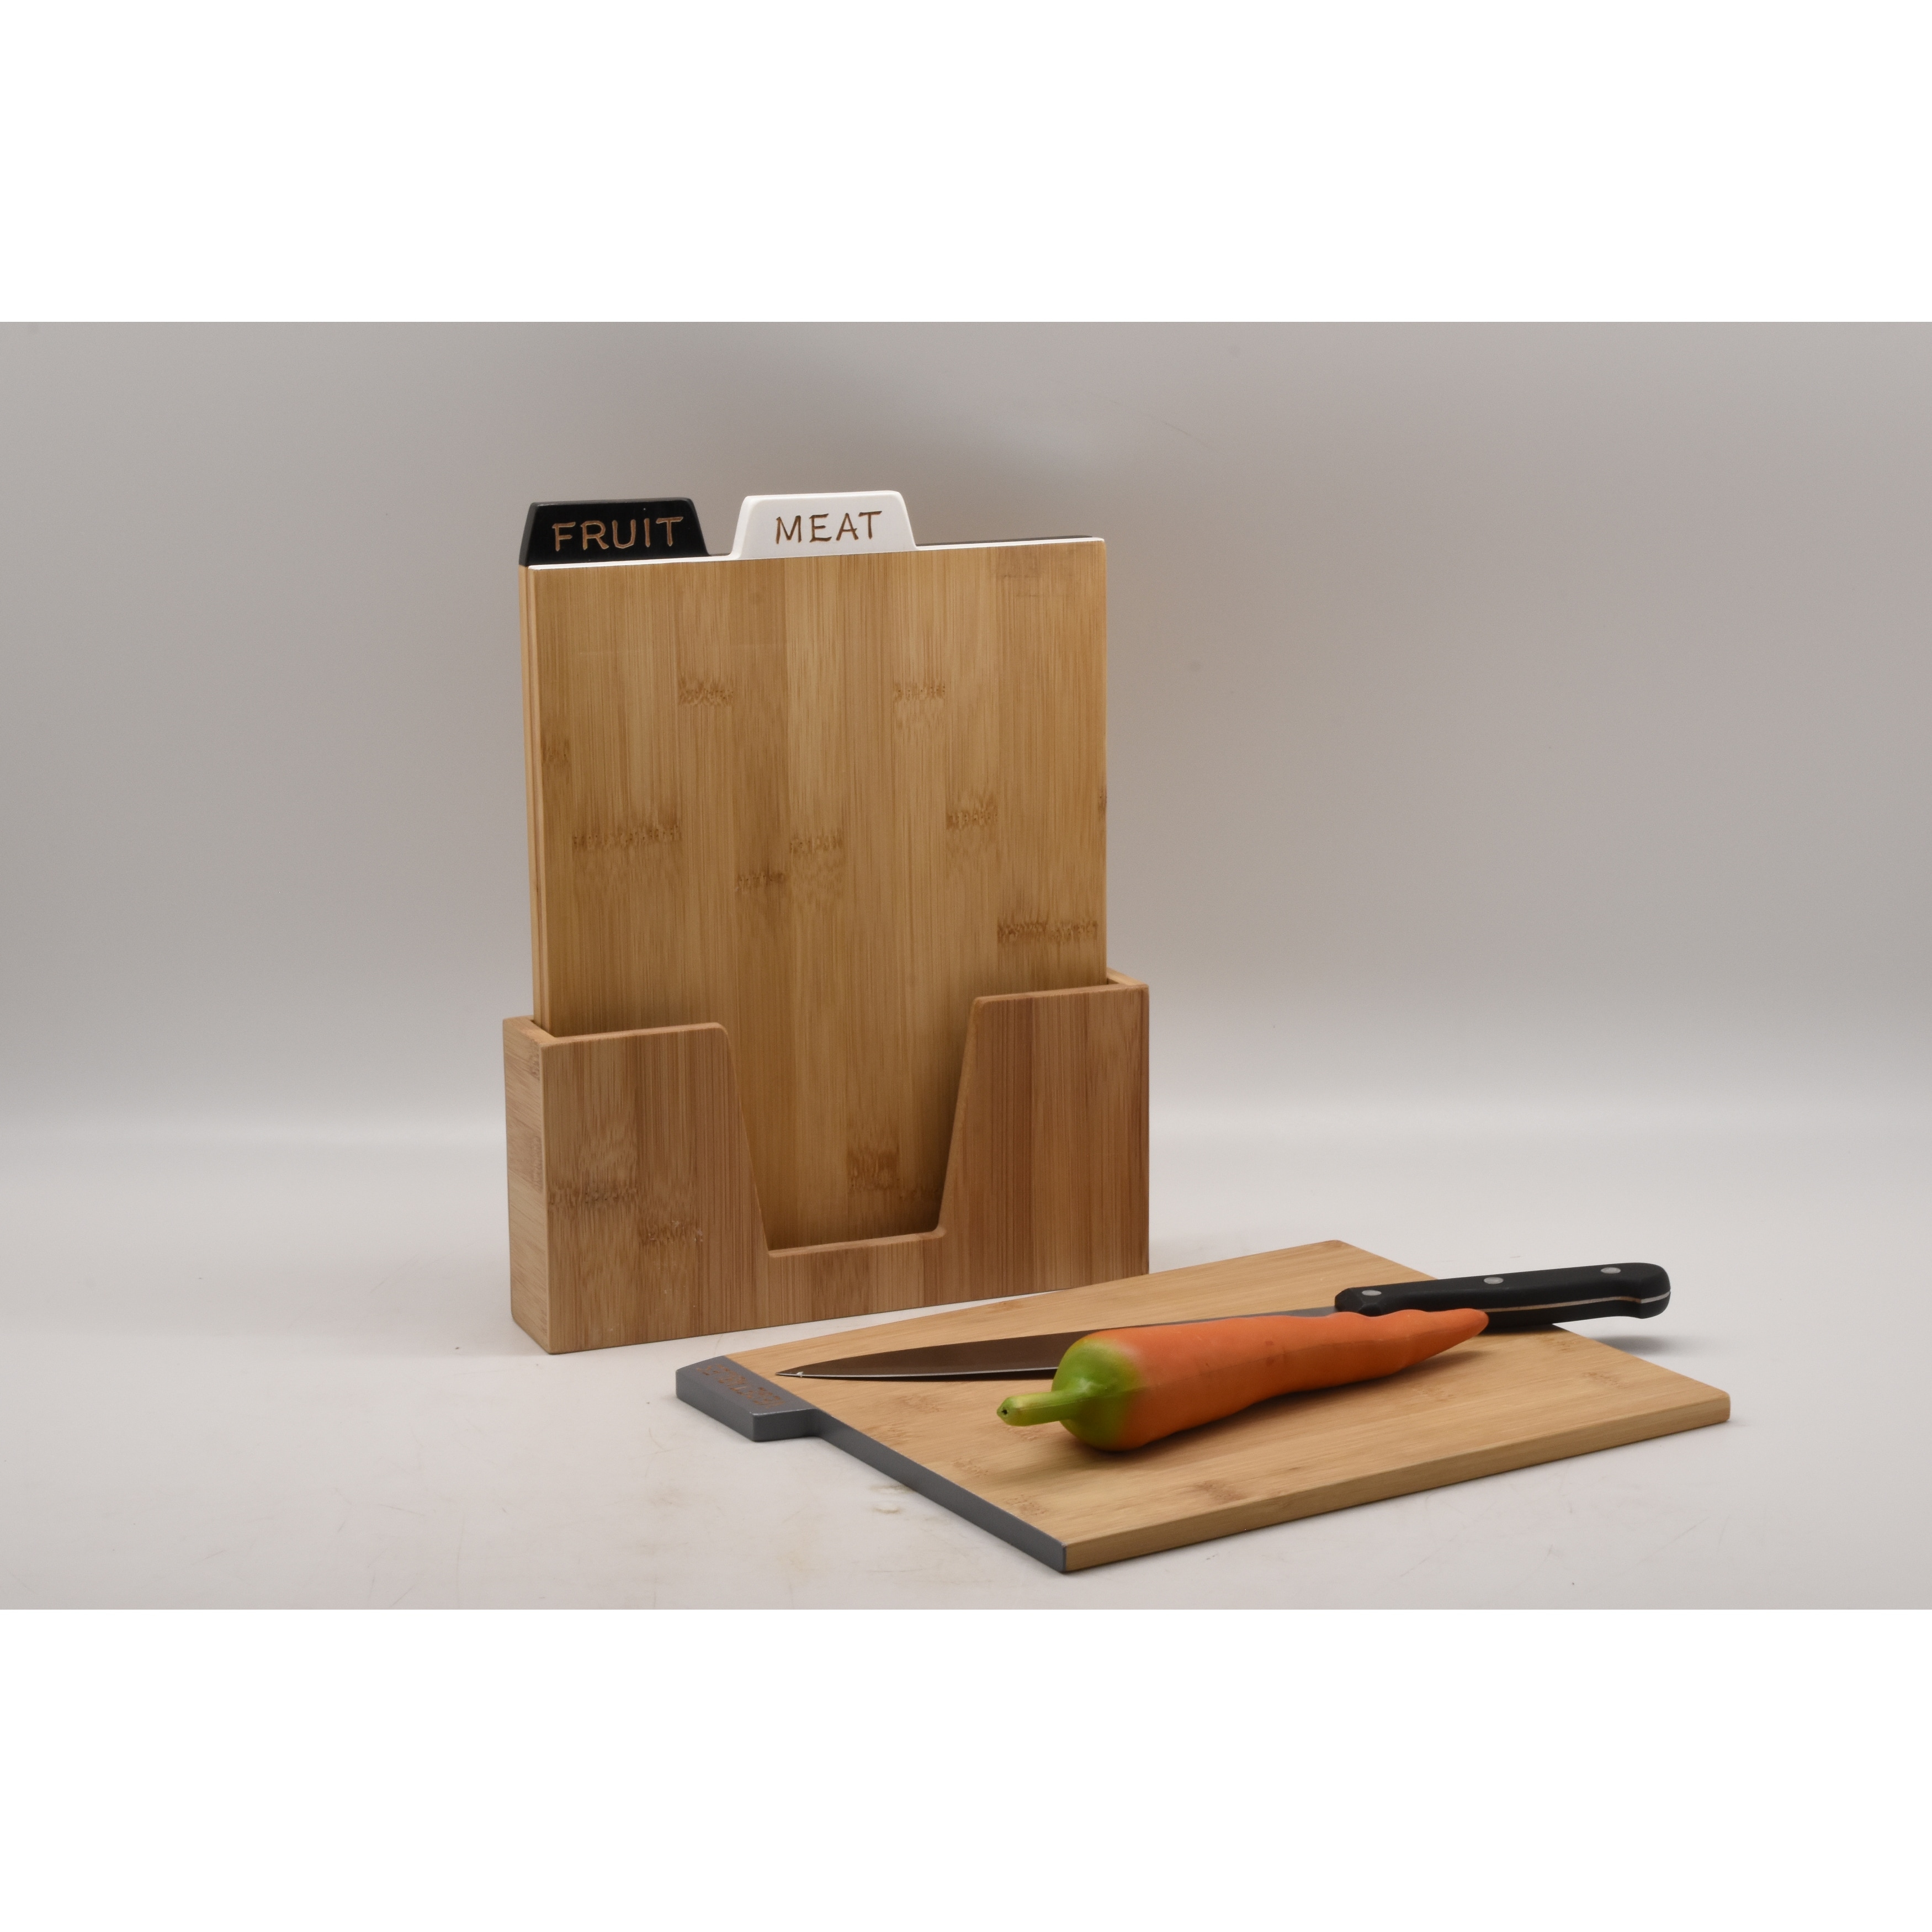 Z Grills Bamboo Wood Cutting Board Kitchen Butcher Carving Chopping BBQ